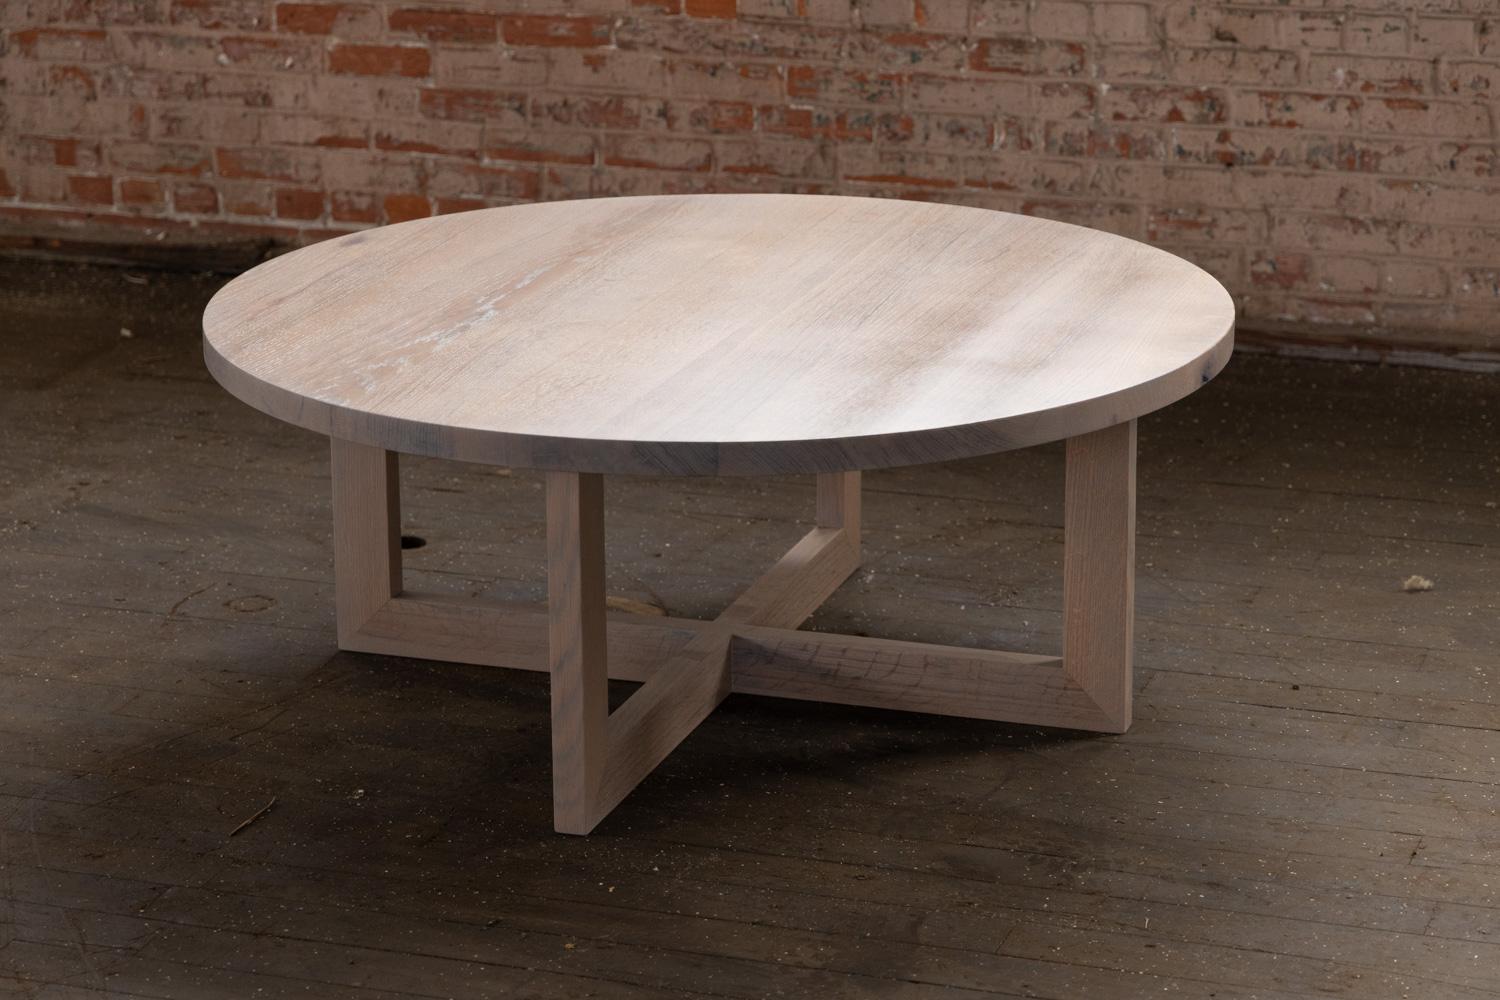 Solid wood from the urban forest imbues this round wood coffee table in grey urban oak with a unique grain and texture. A full 48